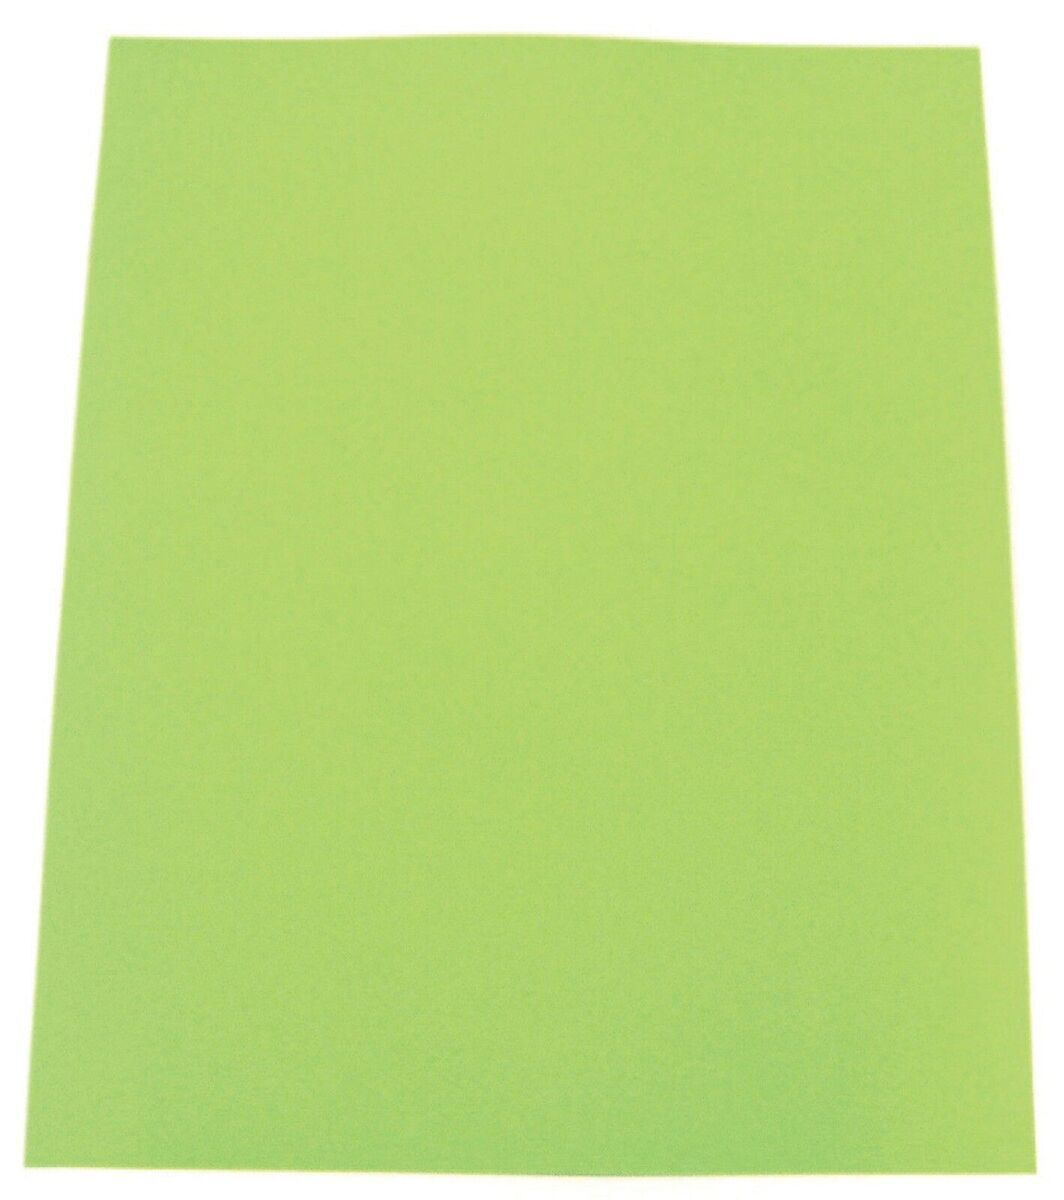 Cumberland Colourful Days Cardboard A3 200gsm Lime Green Pack Of